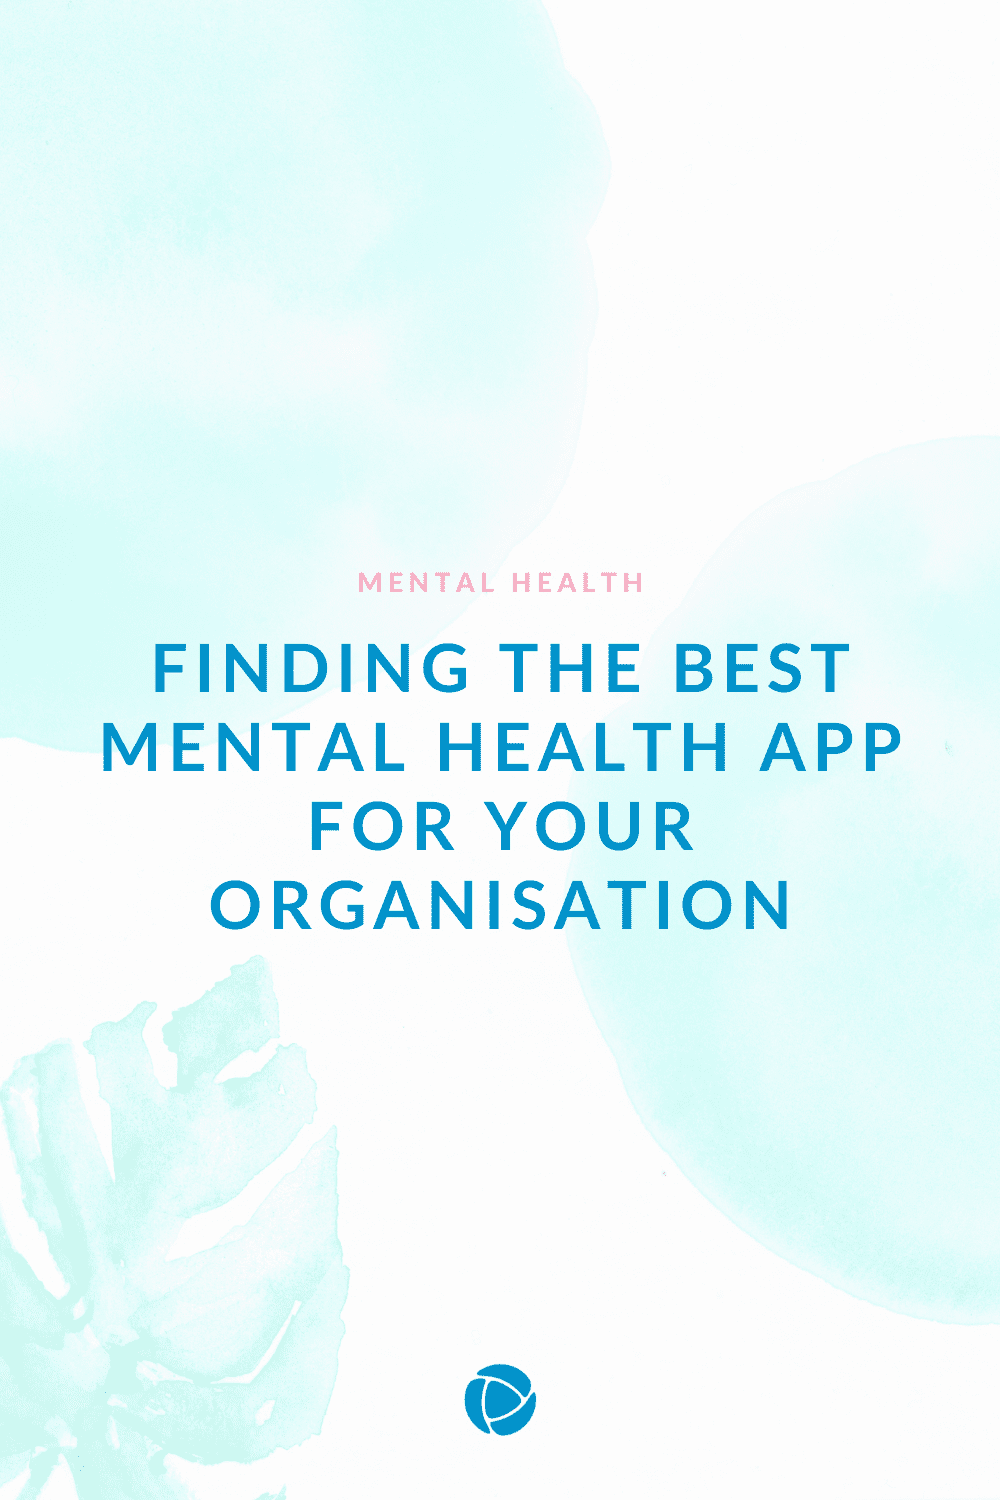 Finding the best mental health app for your organisation